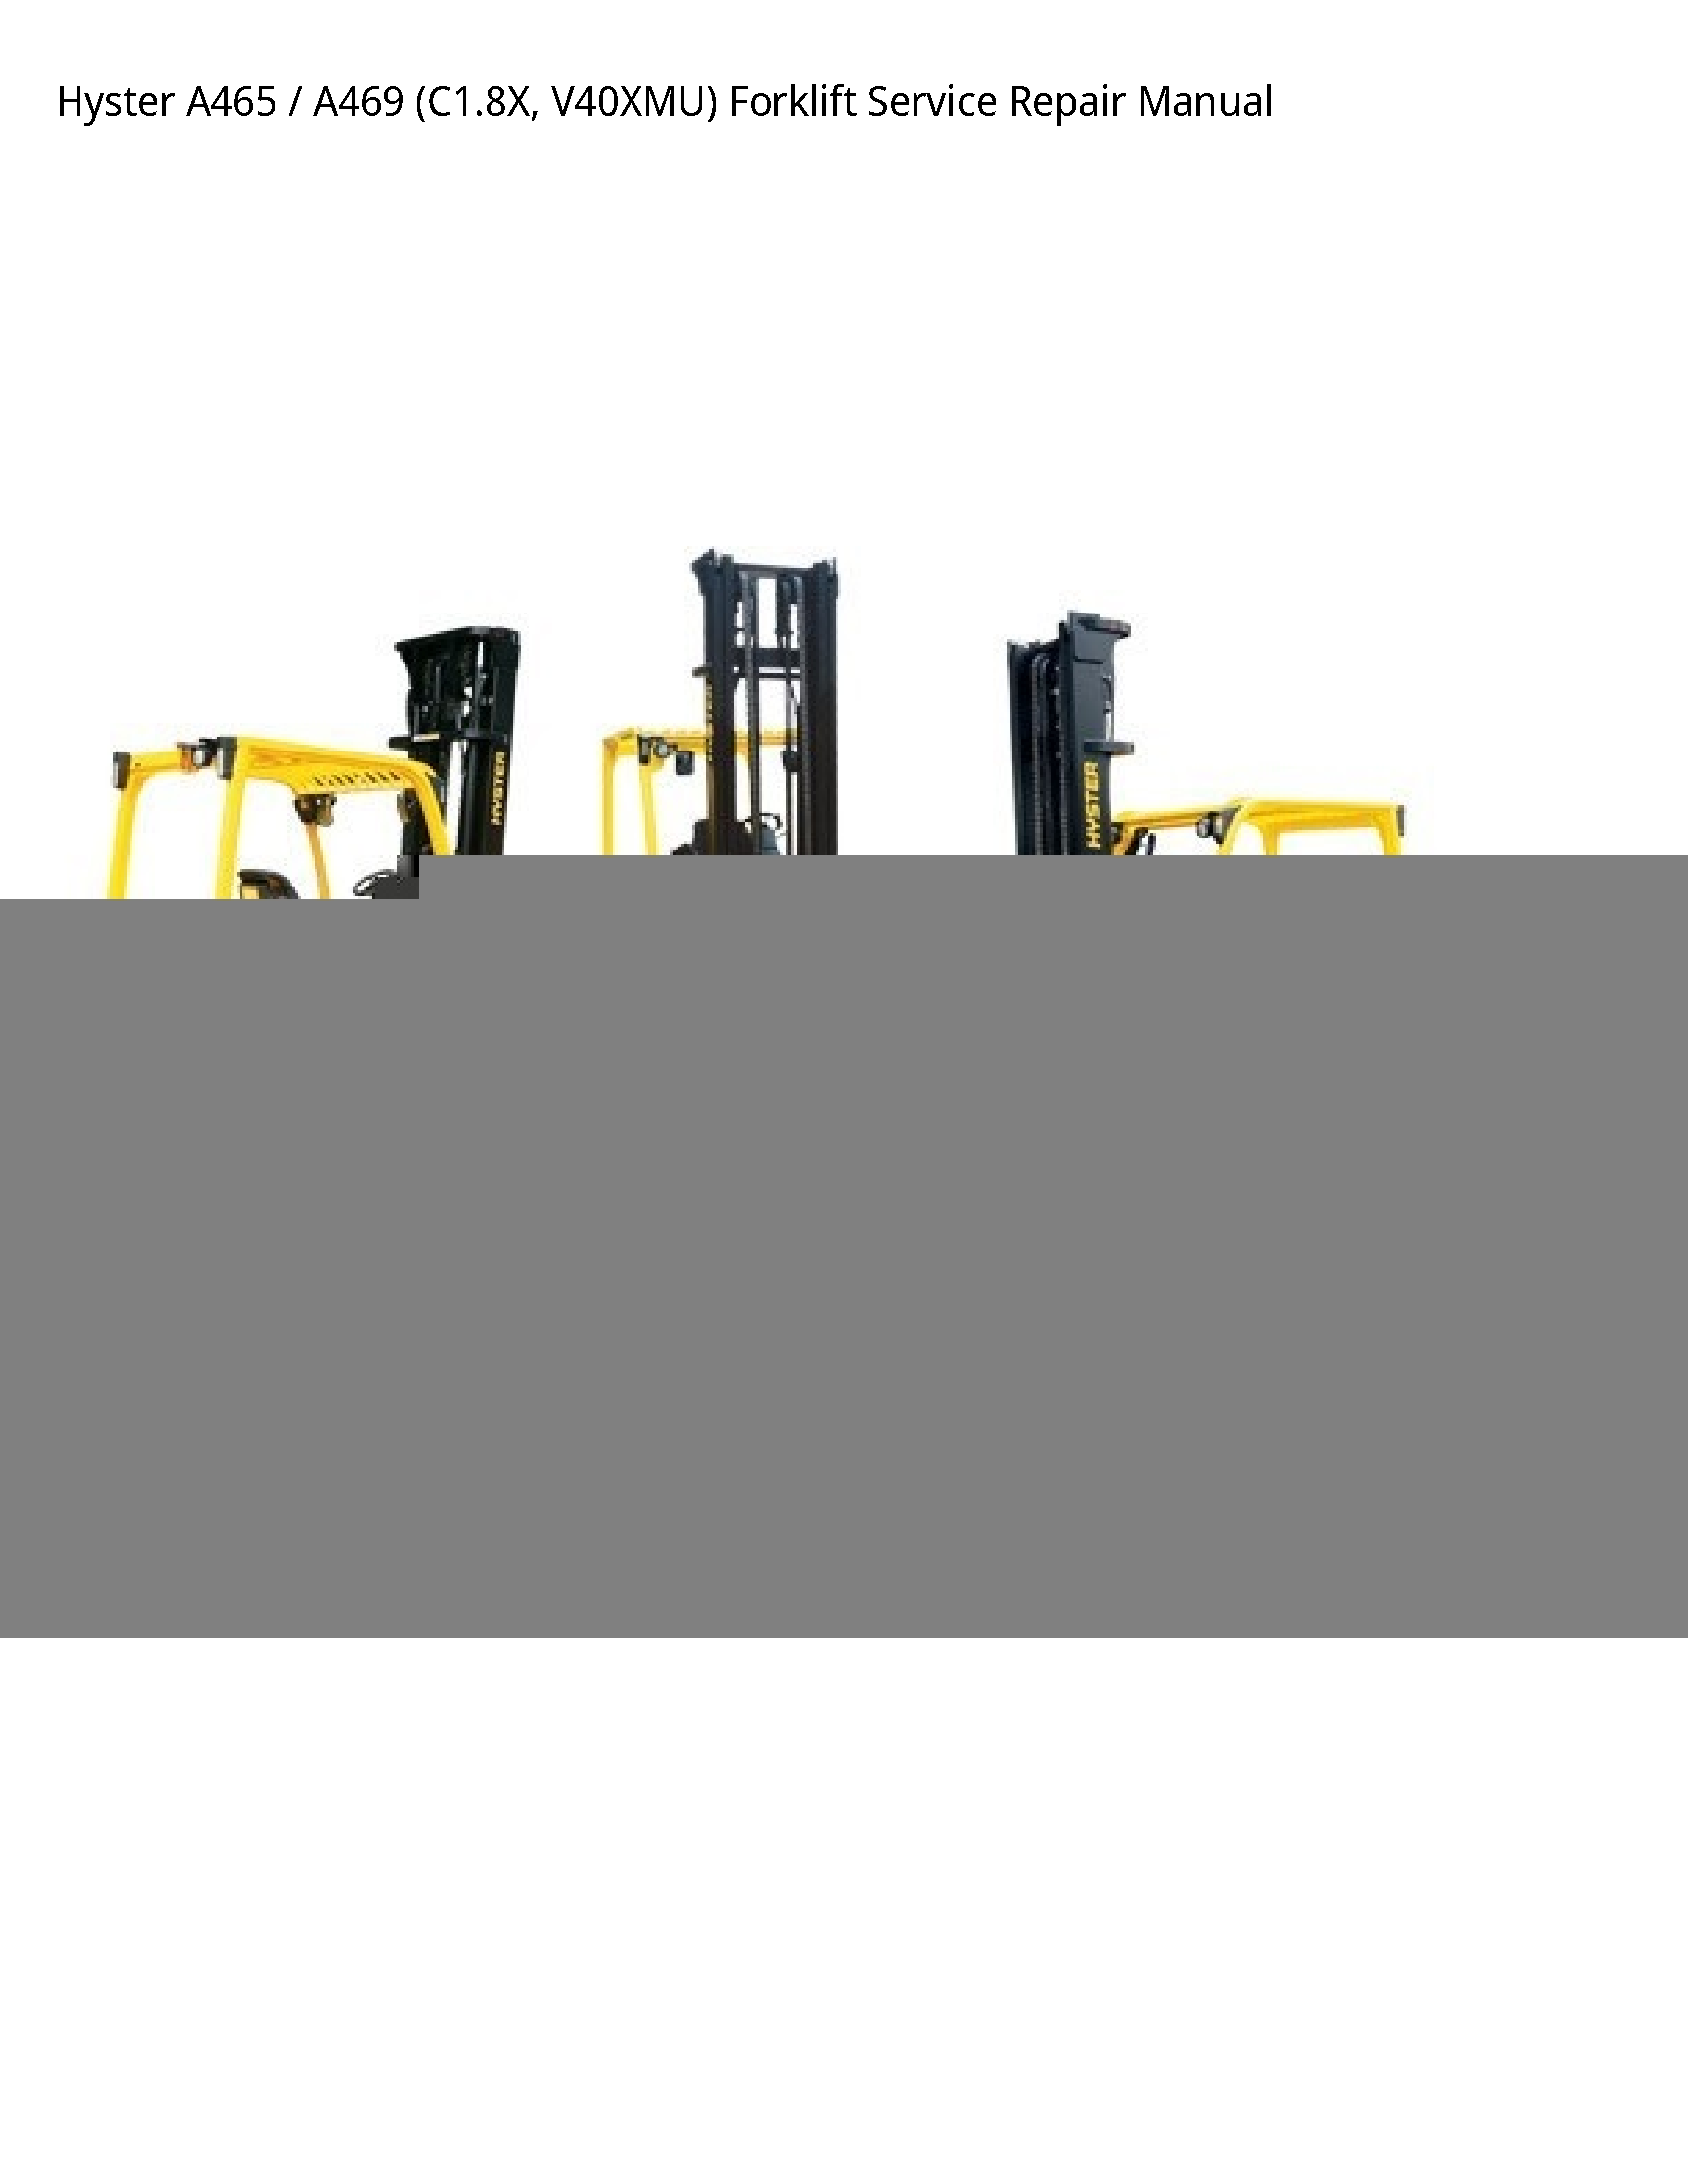 Hyster A465 Forklift manual